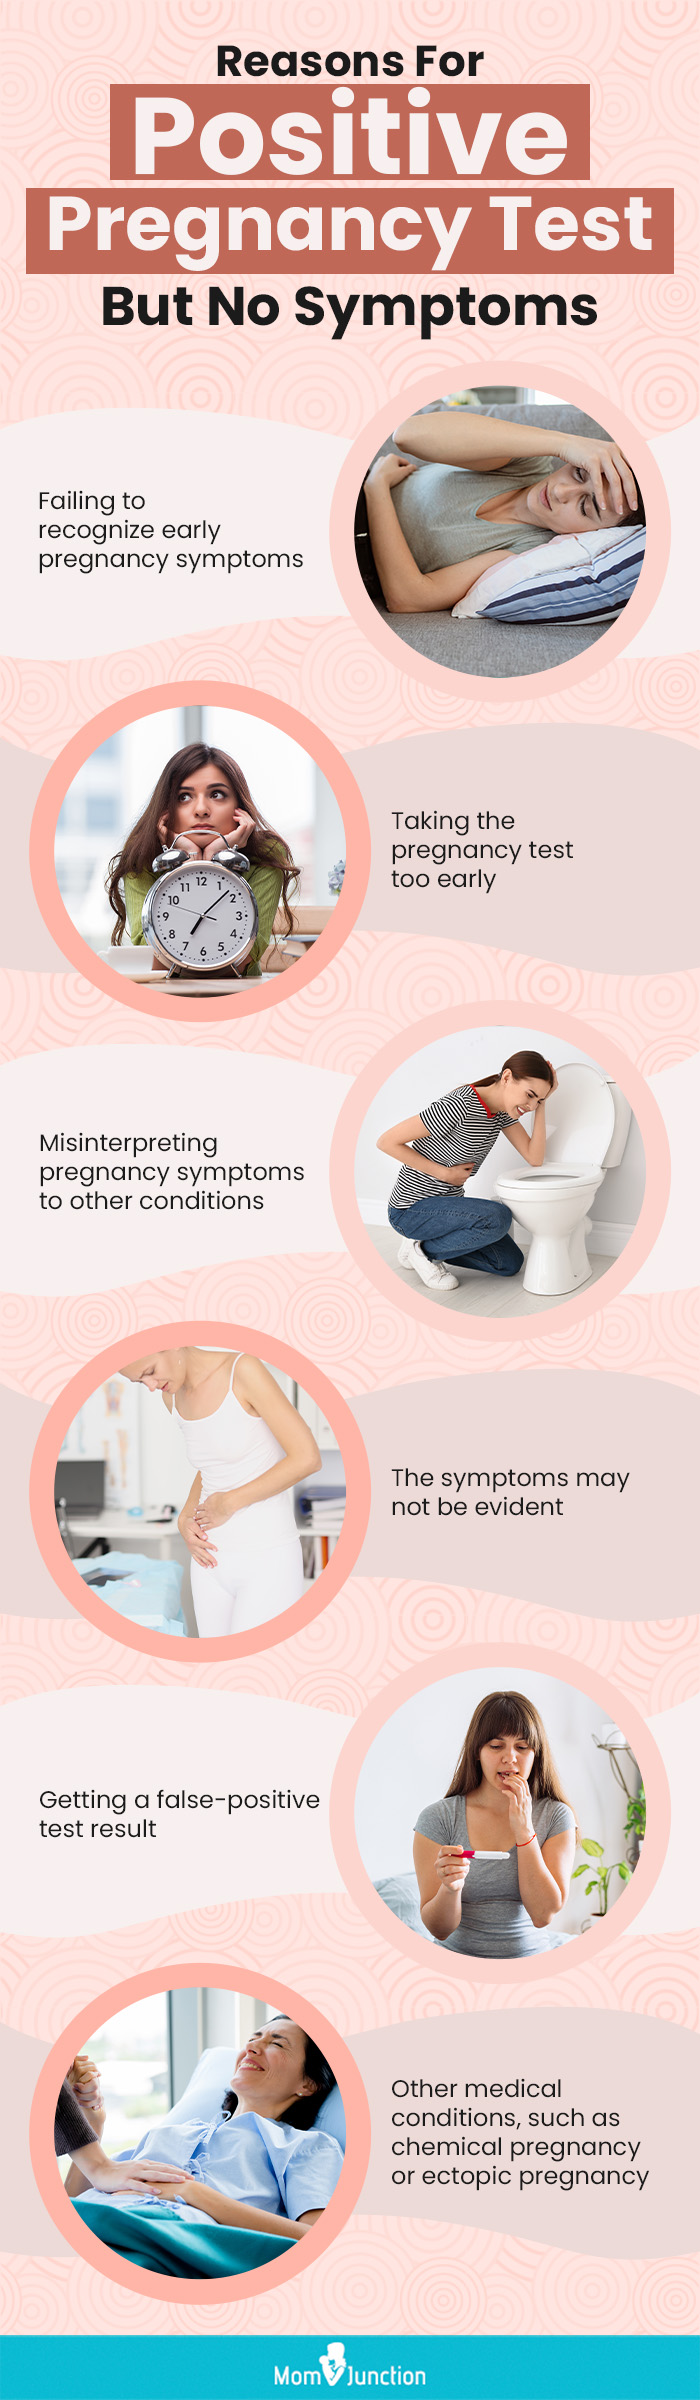 9 Causes Of First Trimester Bleeding (Spotting) & Treatment